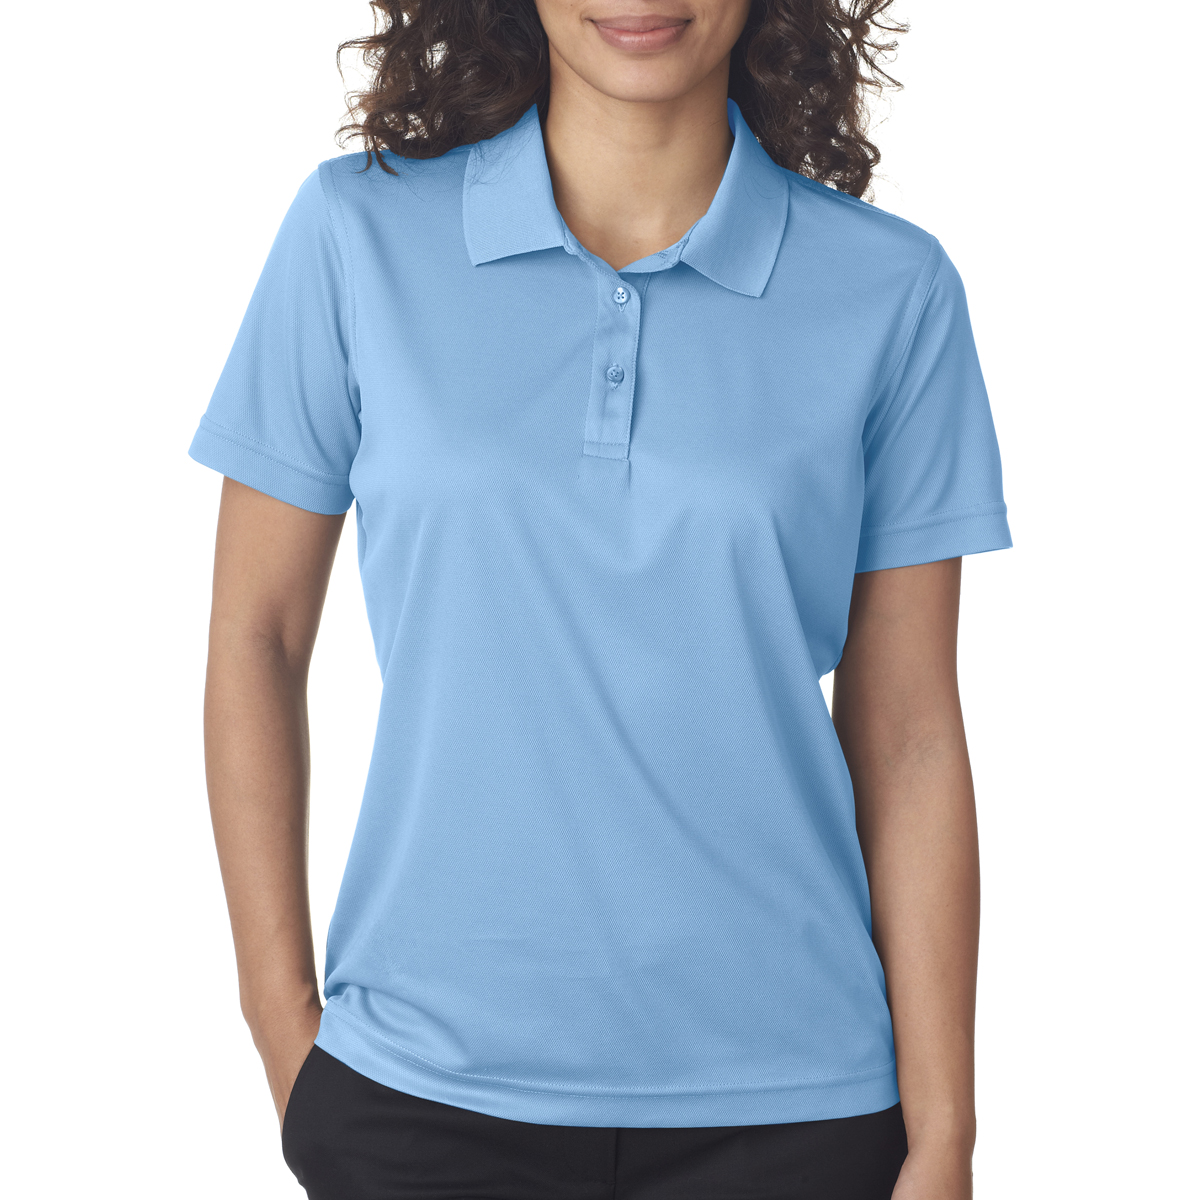 UltraClub 8210W Ladies Cool & Dry Mesh Pique Polo Shirts with Embroidery.